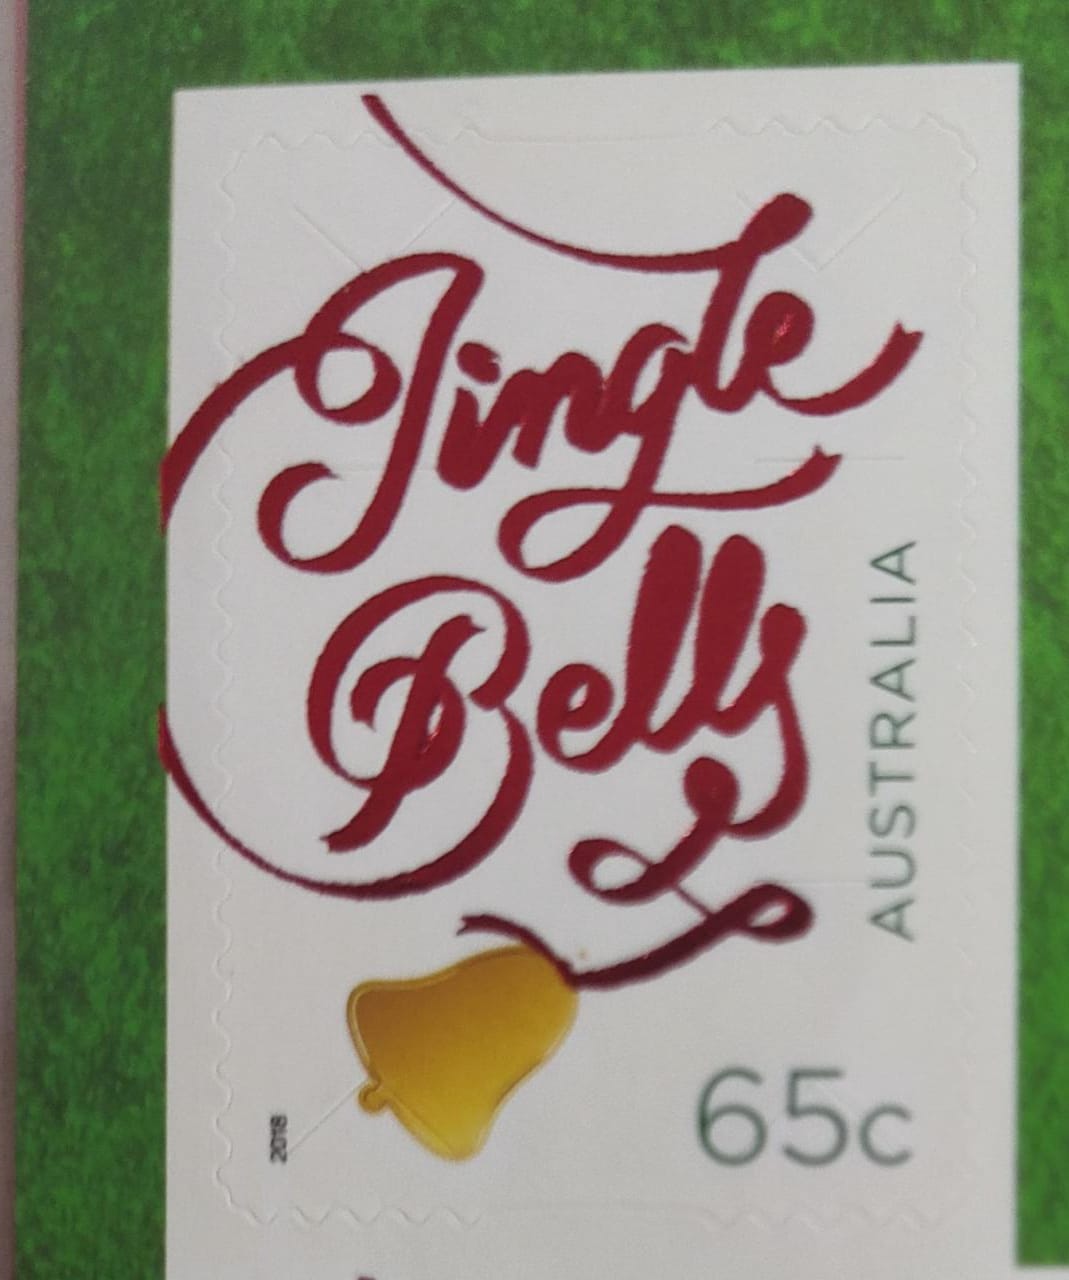 Australia 2018 greetings stamps with red holographic printing on the words jingle bells.